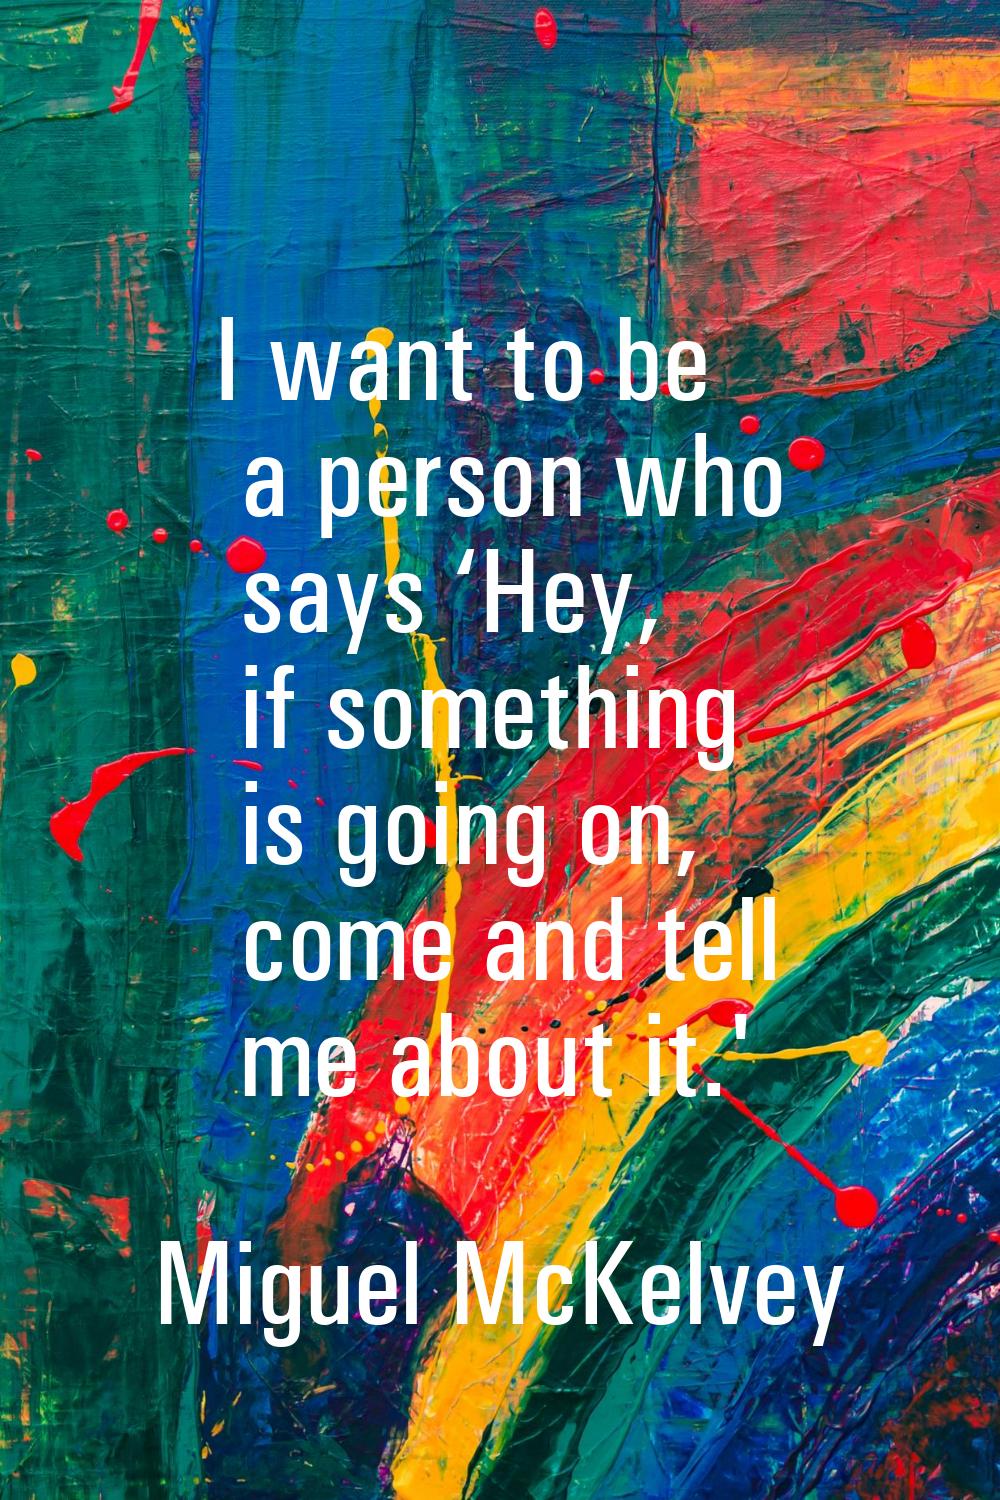 I want to be a person who says ‘Hey, if something is going on, come and tell me about it.'